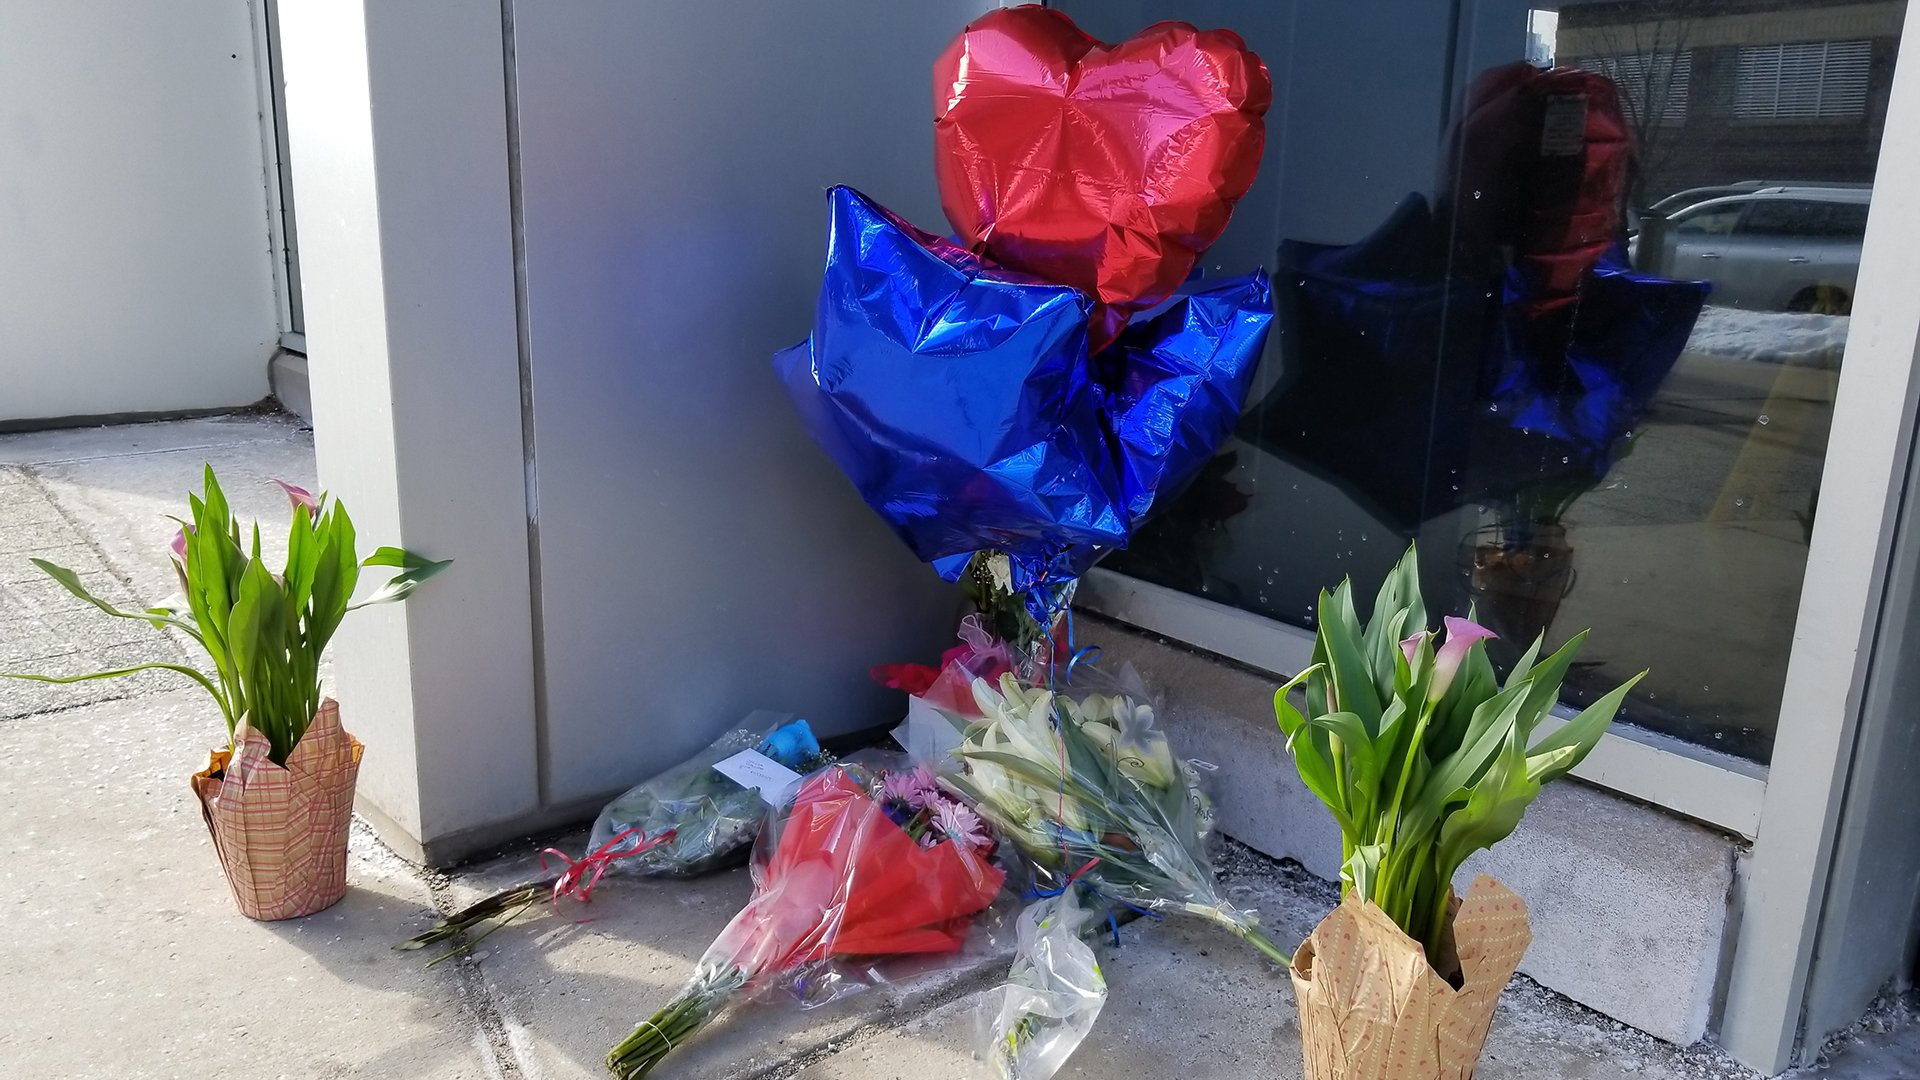 Flowers and balloons were left as a makeshift memorial to CPD Cmdr. Paul Bauer outside his 18th District precinct. (Matt Masterson / Chicago Tonight)